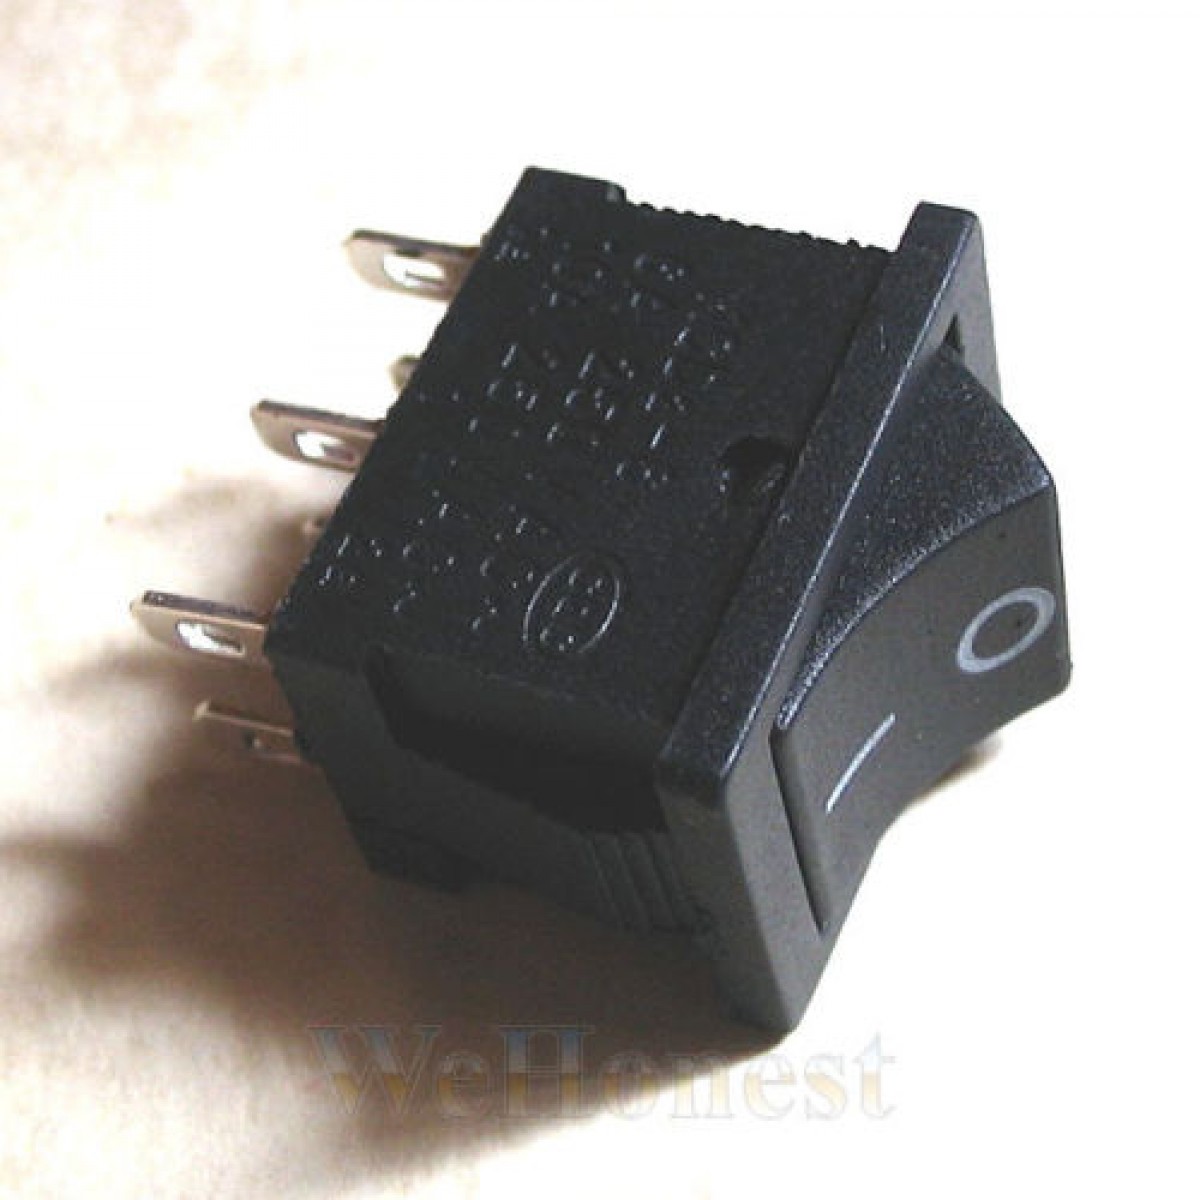 5 x On / Off Rocker Switches DPDT Quality